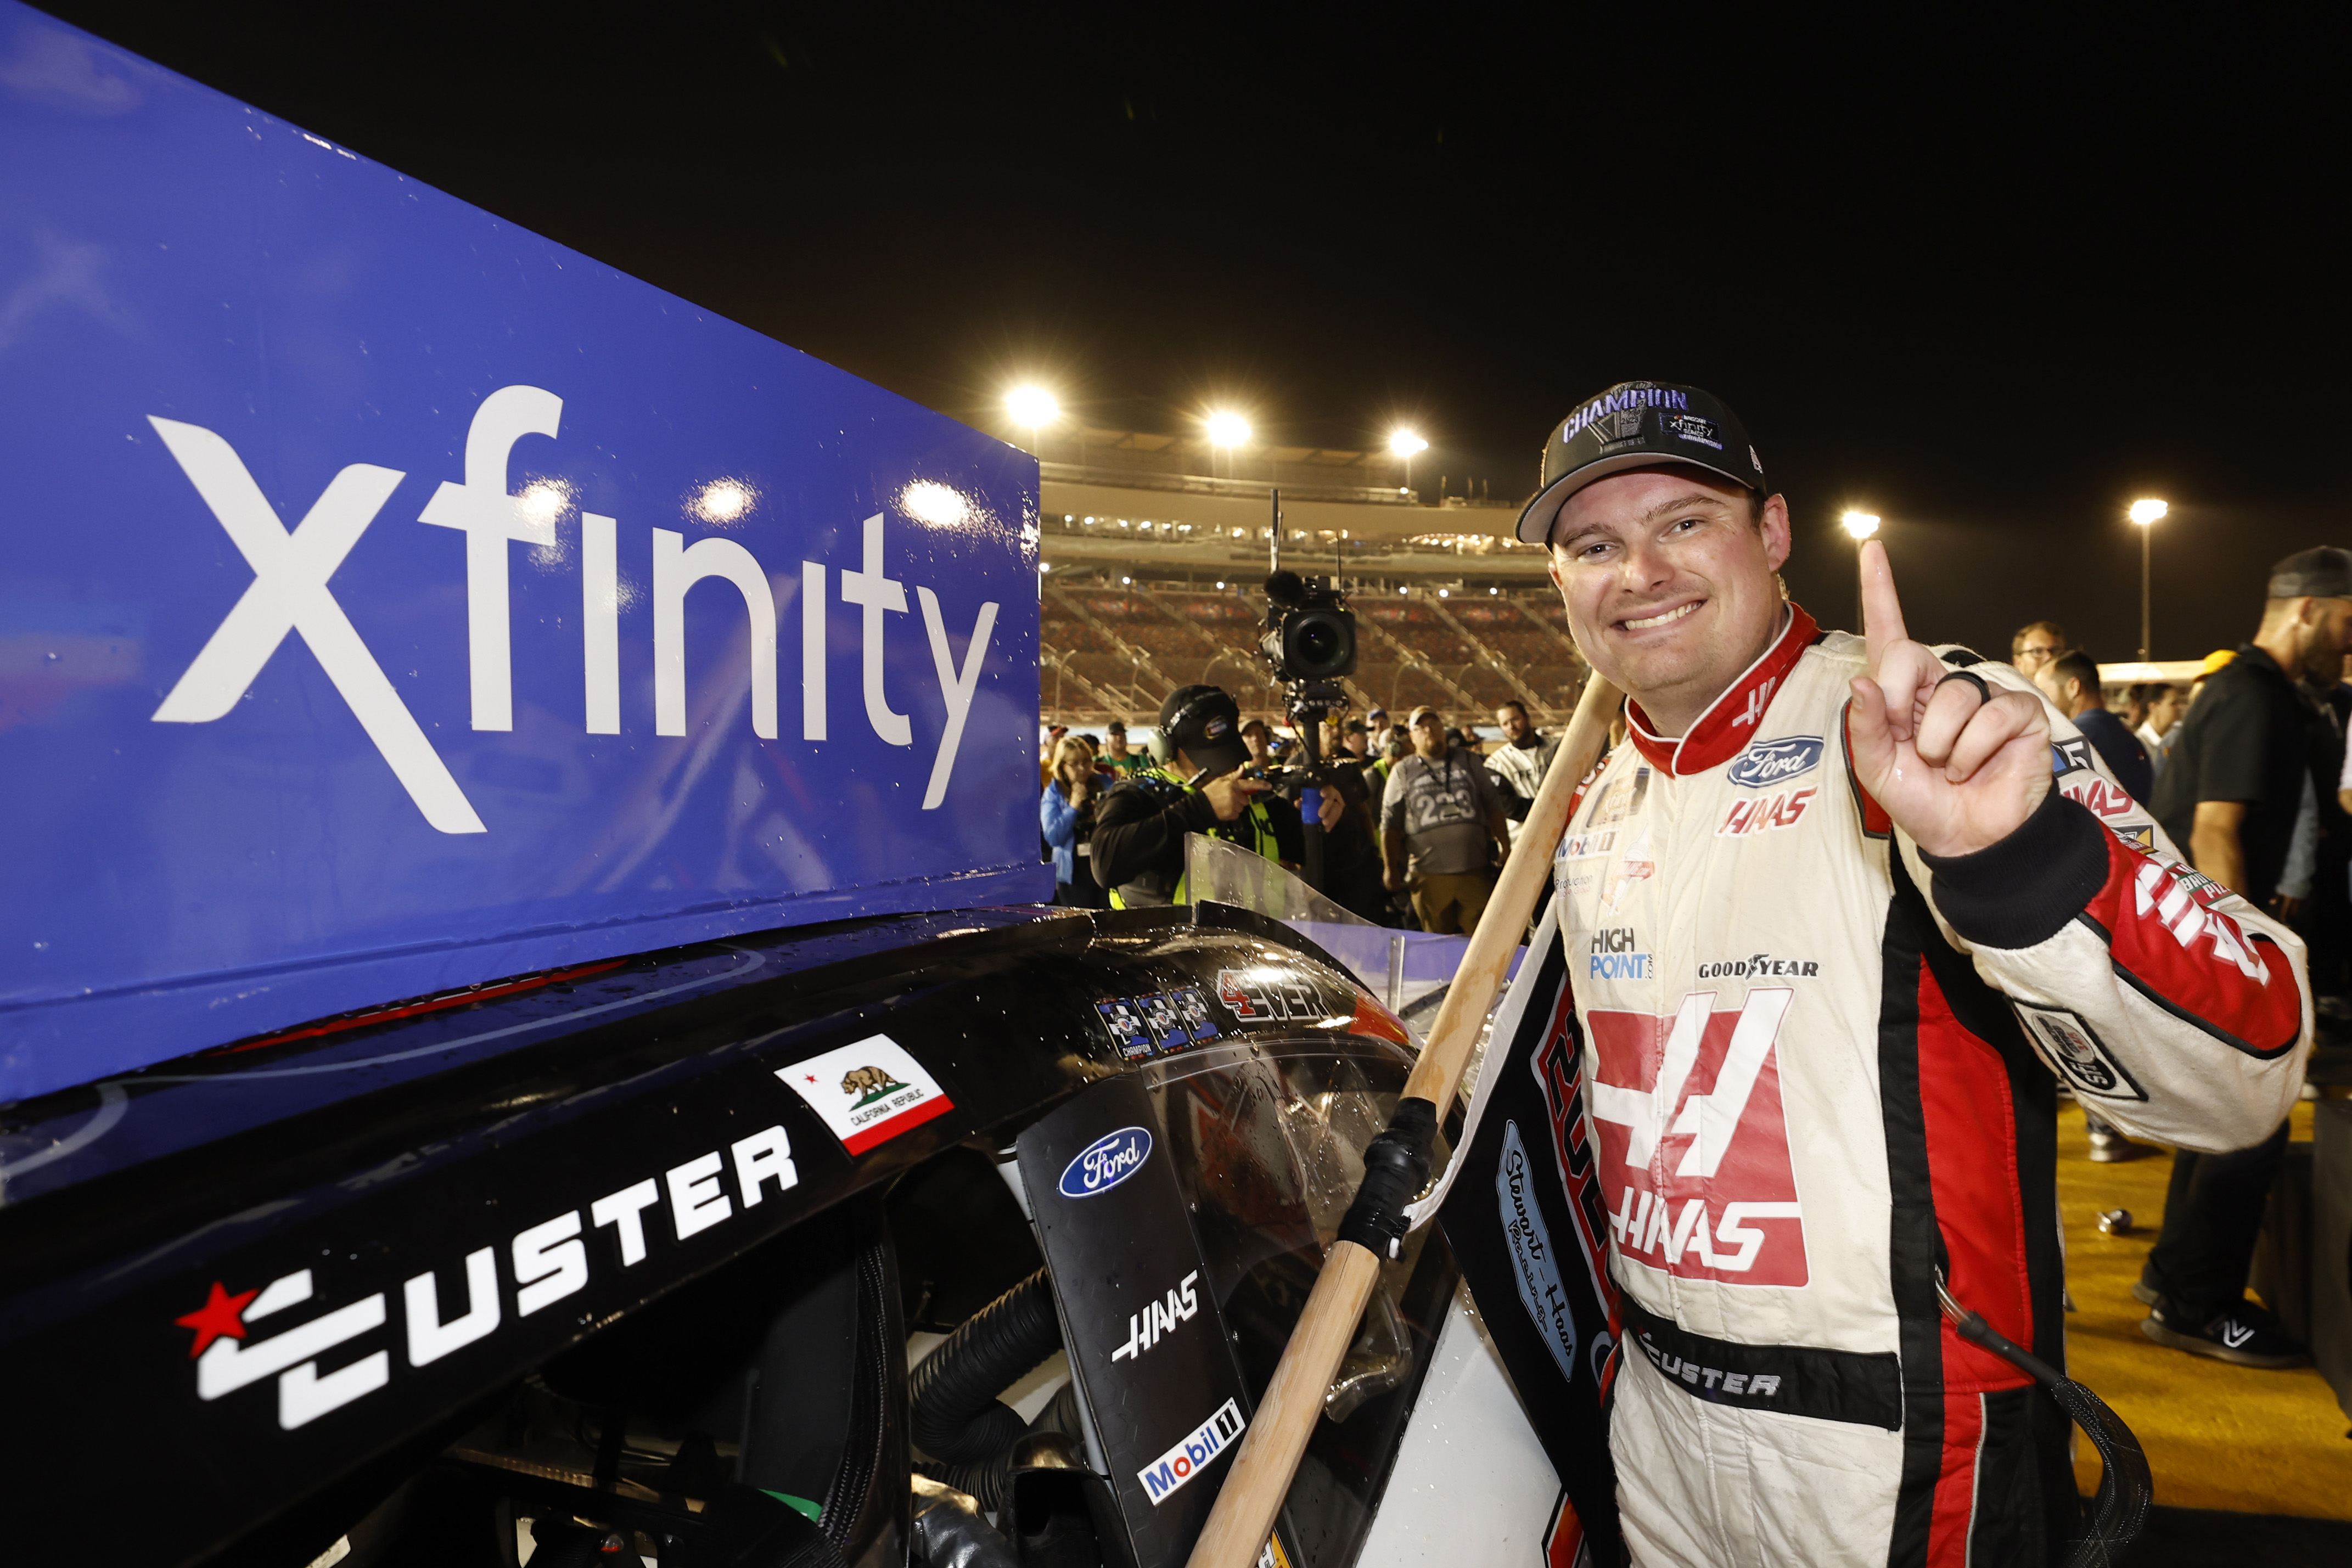 Cole Custer makes it very clear who won the NASCAR Xfinity championship Saturday at Phoenix Raceway. (Photo by Chris Graythen/Getty Images)